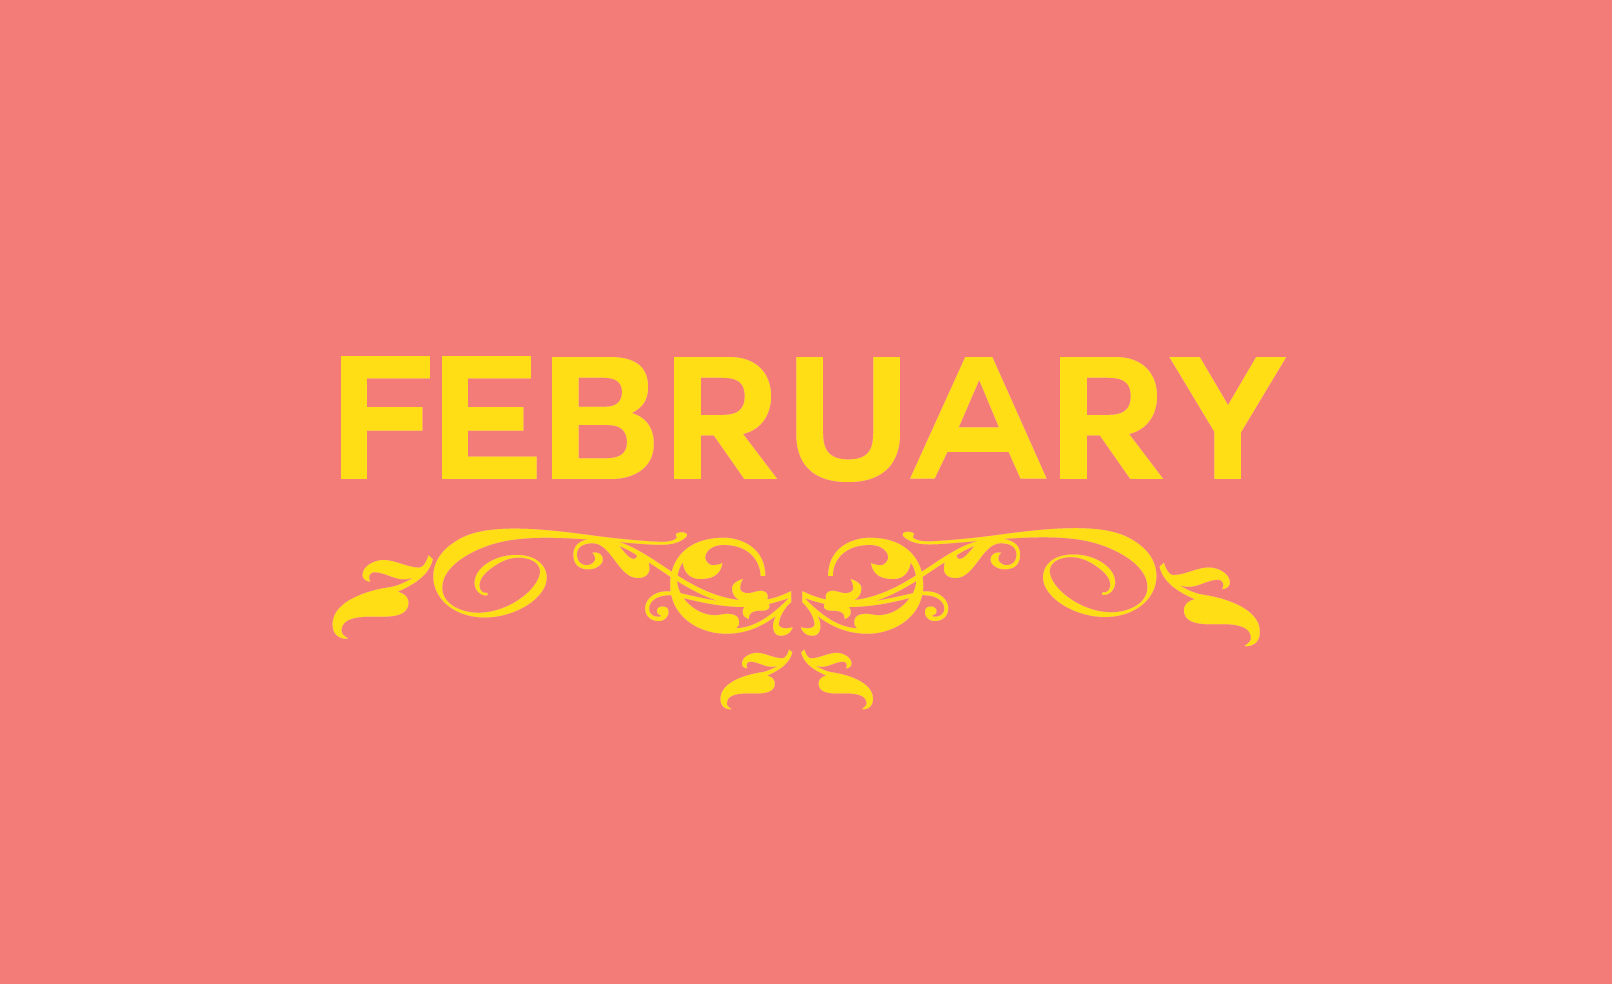 Pink banner with "February" in gold text